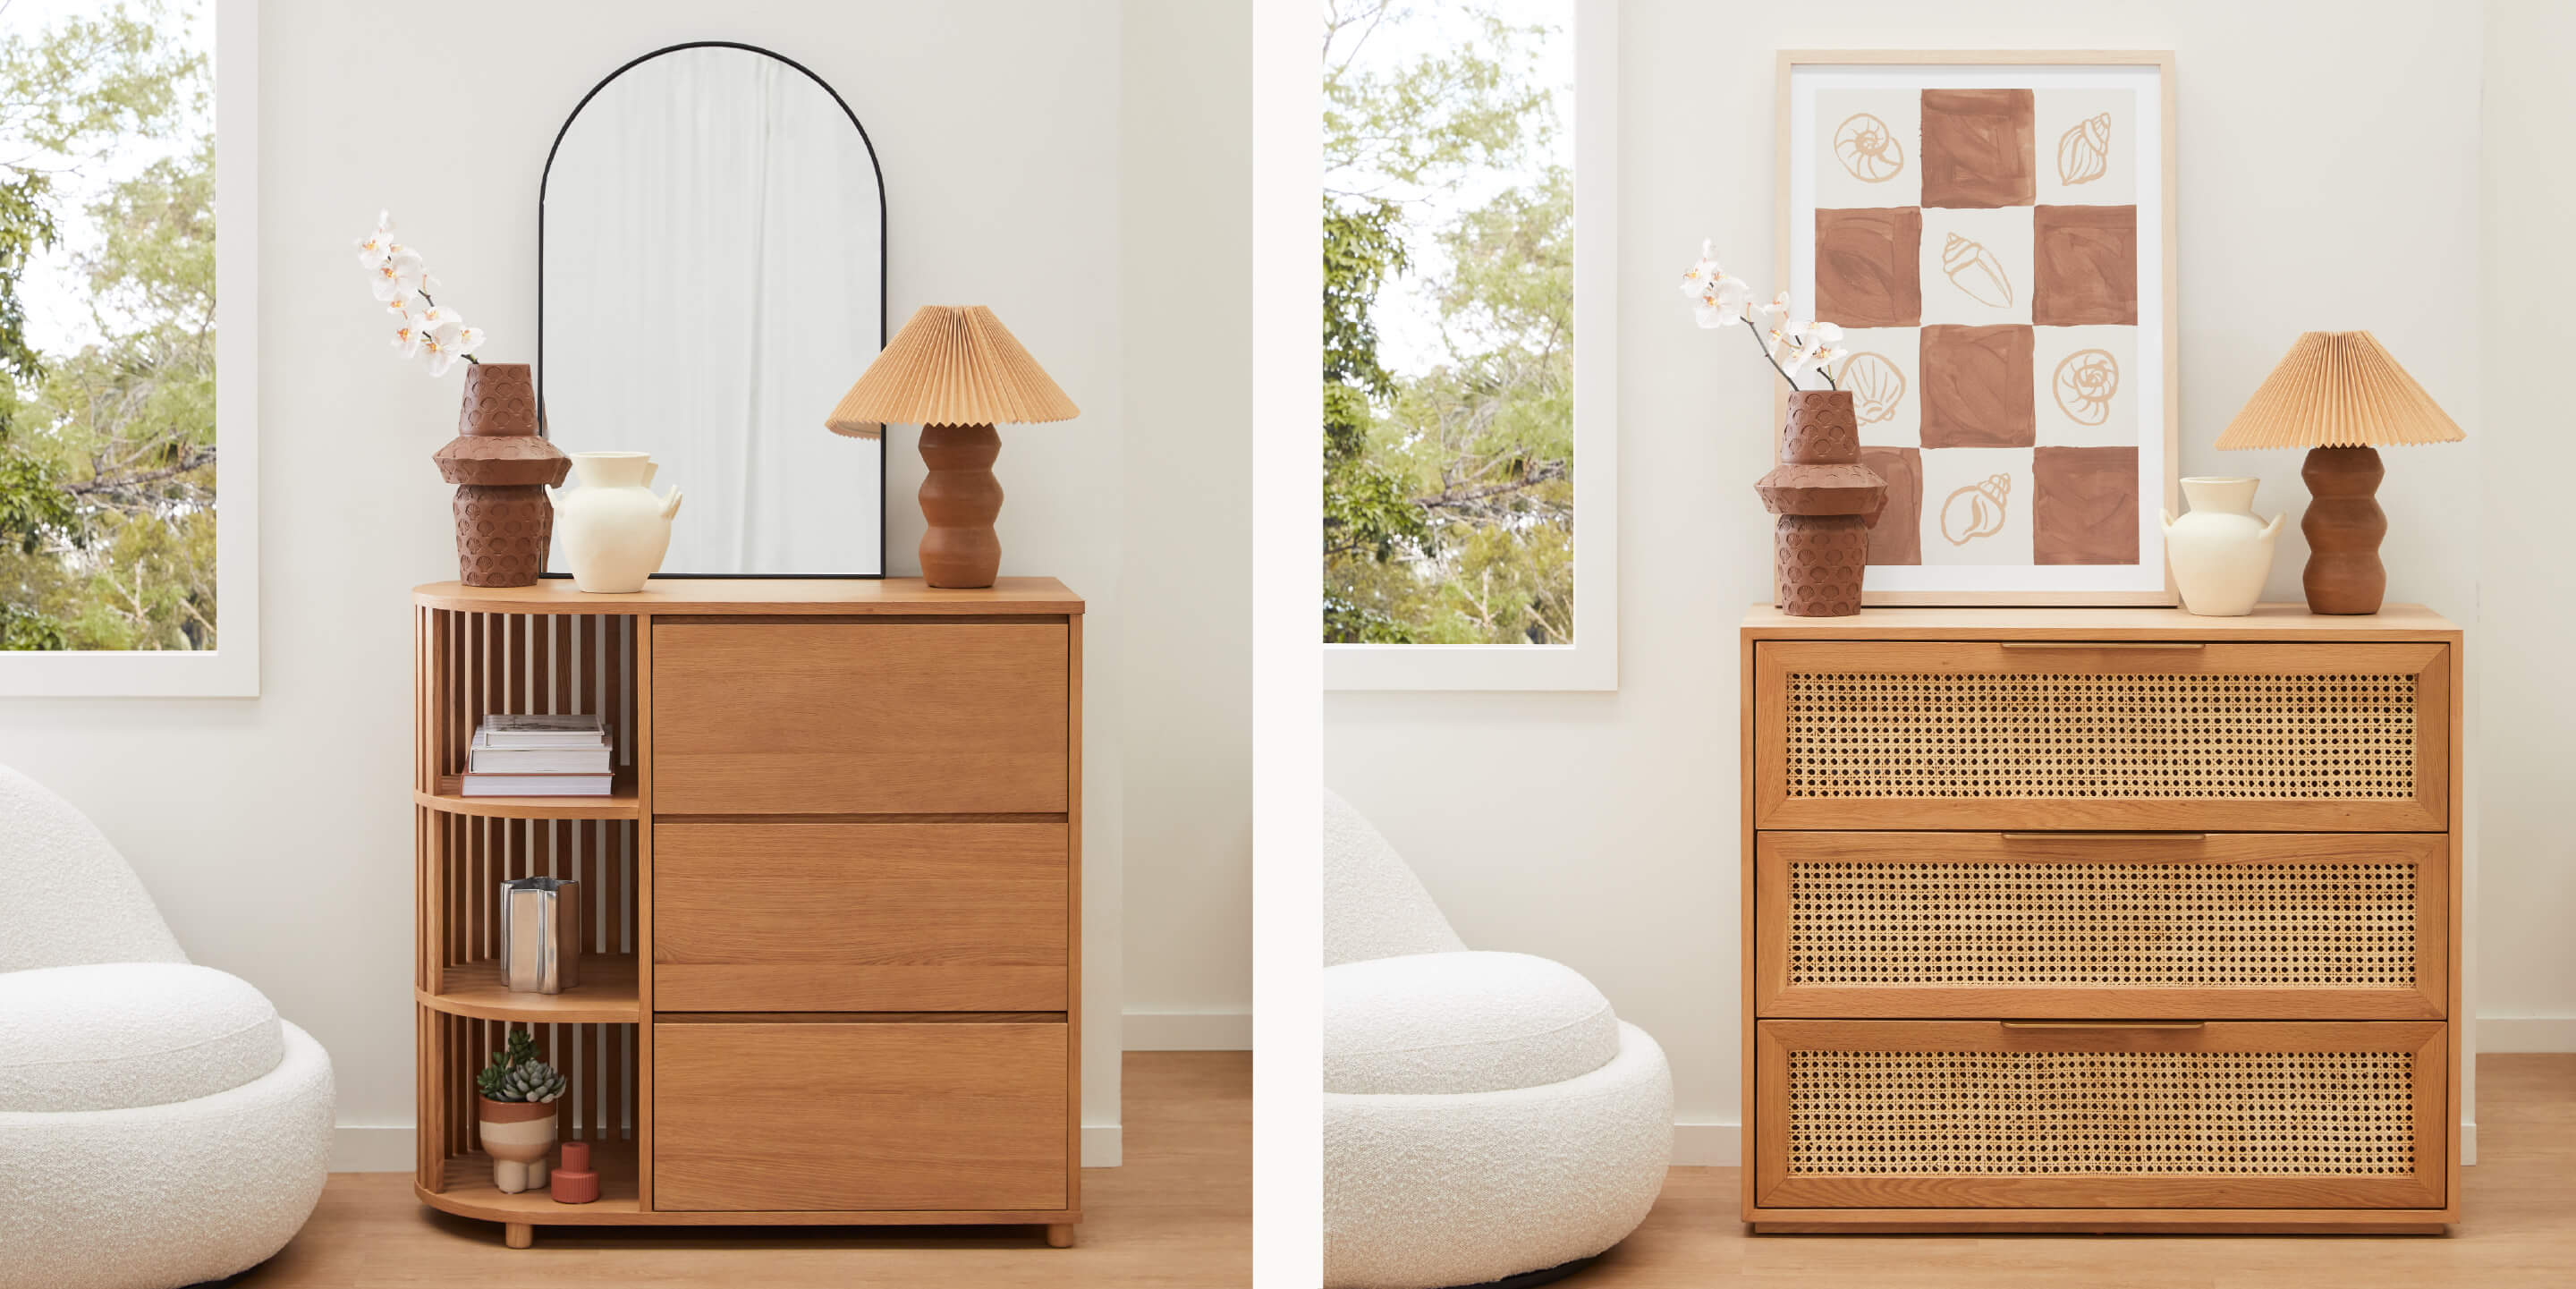 Introducing our Capsule Spring/ Summer 22 collection, the Boucle Bedroom space is neutral and contemporary, full of stunning boucle pieces, bedsides, storage and home decor. Shop the collection online or in-store now!